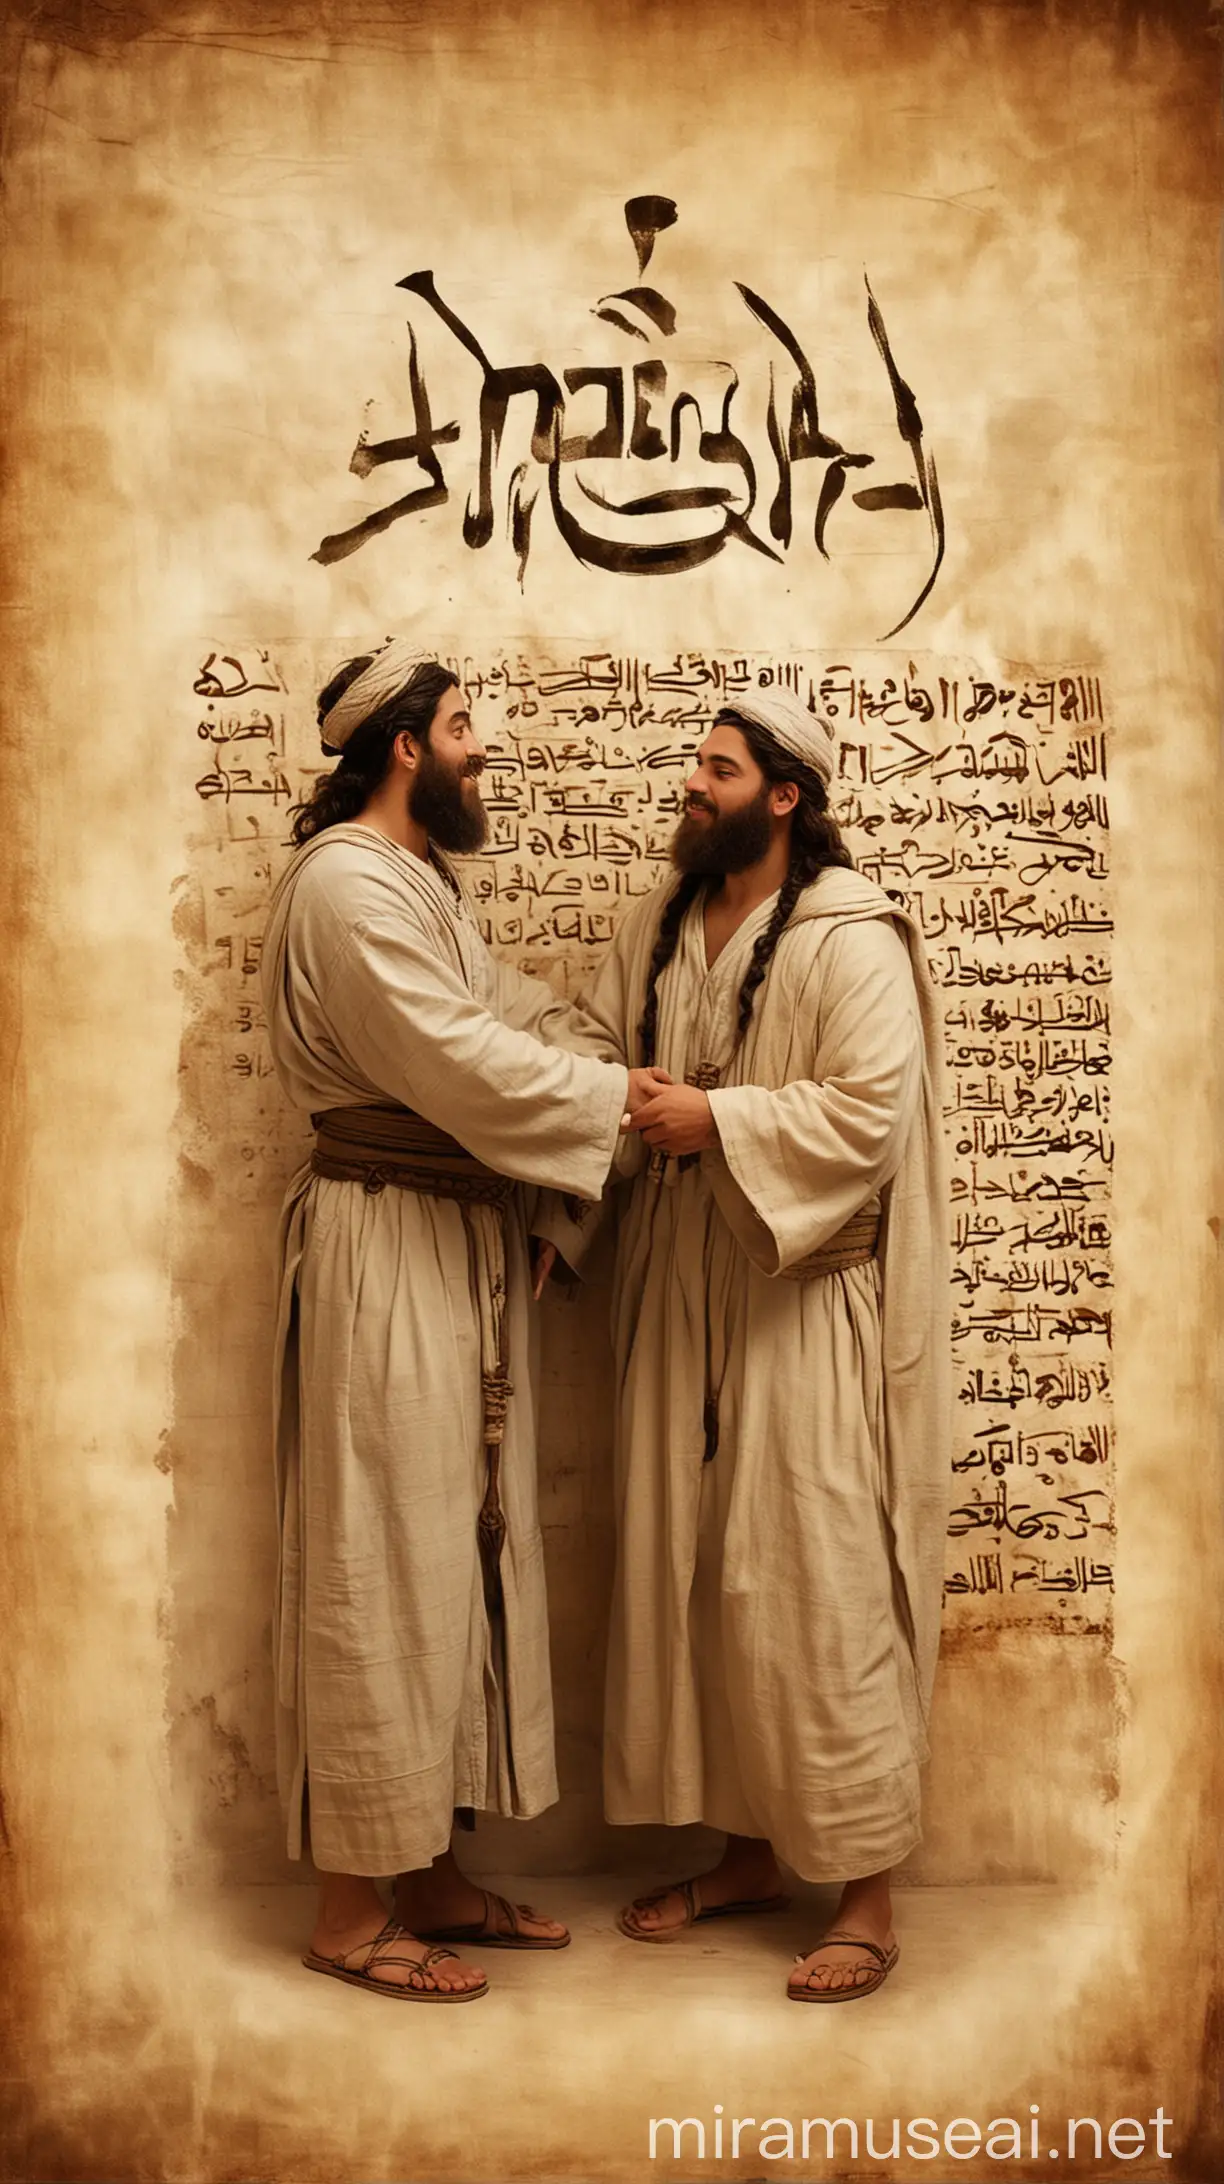 Create an image depicting the name 'Ehi' written in ancient Hebrew script, featuring a warm, brotherly scene with Ehi and another person. Ehi should be shown in ancient attire, interacting in a friendly, supportive manner with his companion. The background should have subtle ancient scroll or parchment textures."In ancient world 